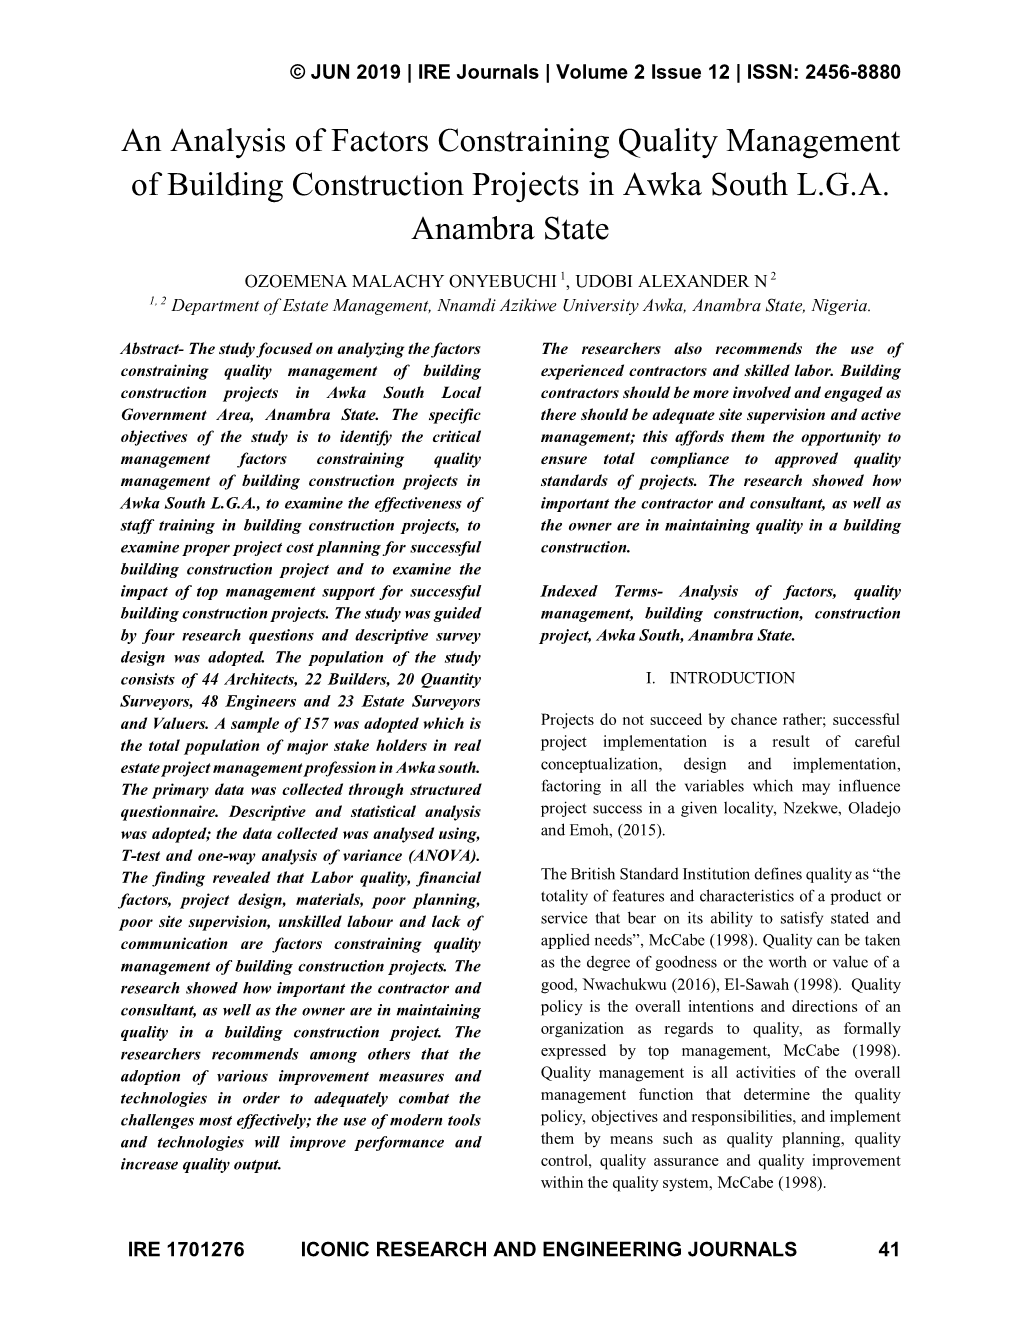 An Analysis of Factors Constraining Quality Management of Building Construction Projects in Awka South L.G.A